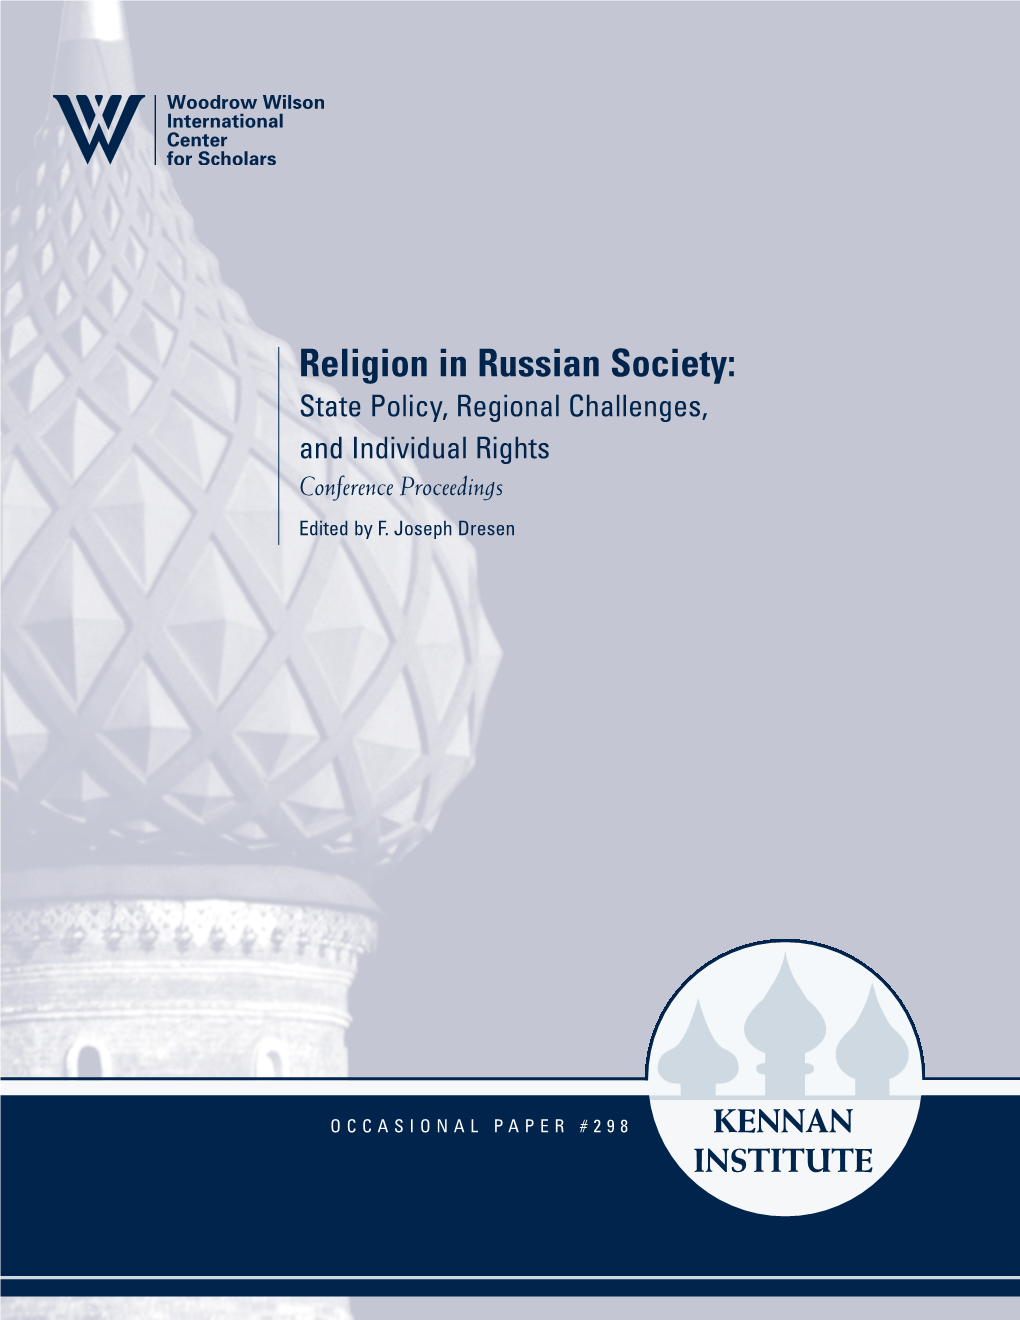 Religion in Russian Society: State Policy, Regional Challenges, and Individual Rights Conference Proceedings Edited by F